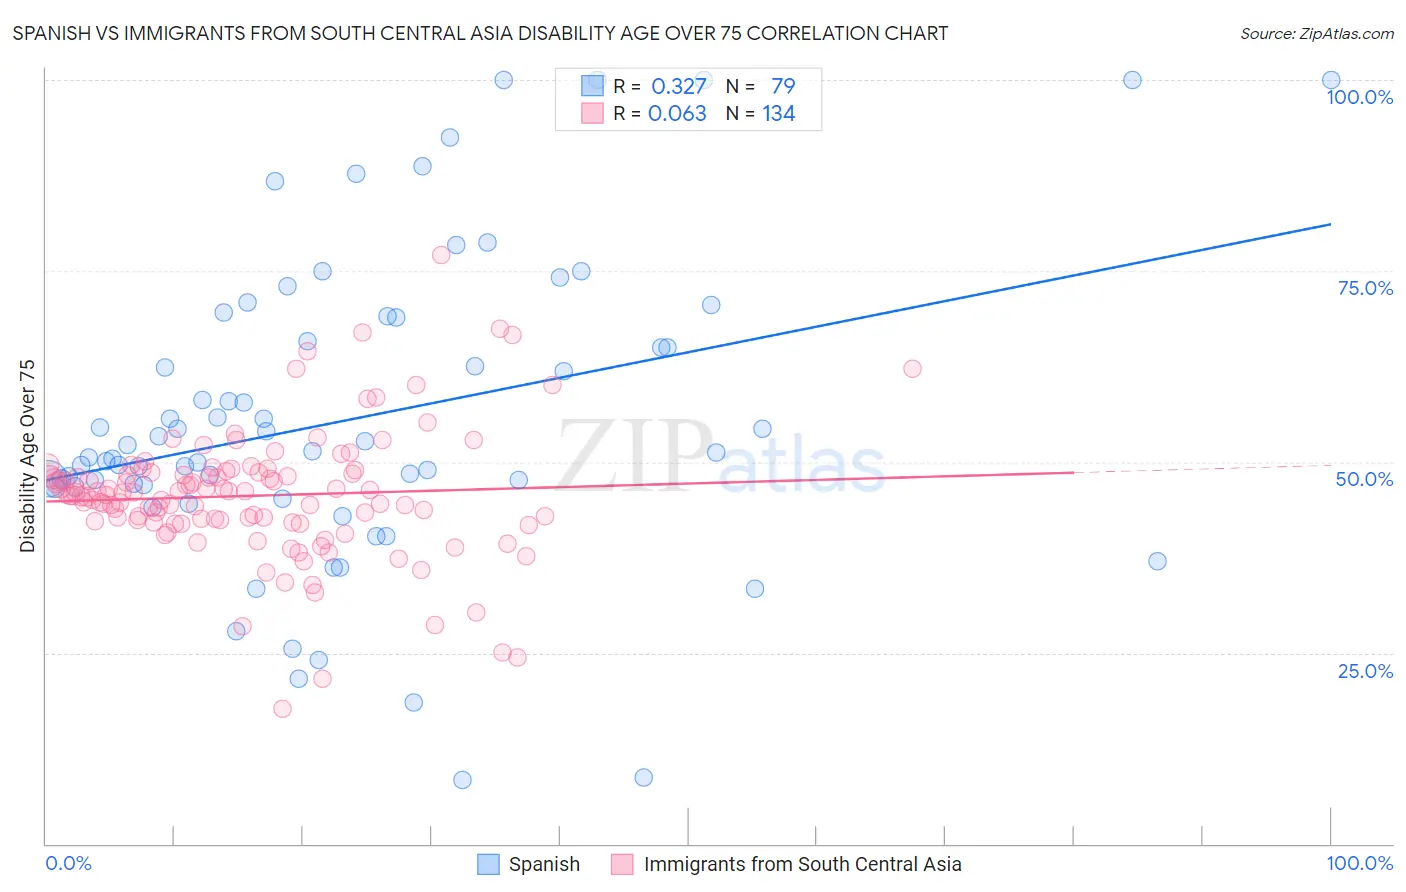 Spanish vs Immigrants from South Central Asia Disability Age Over 75